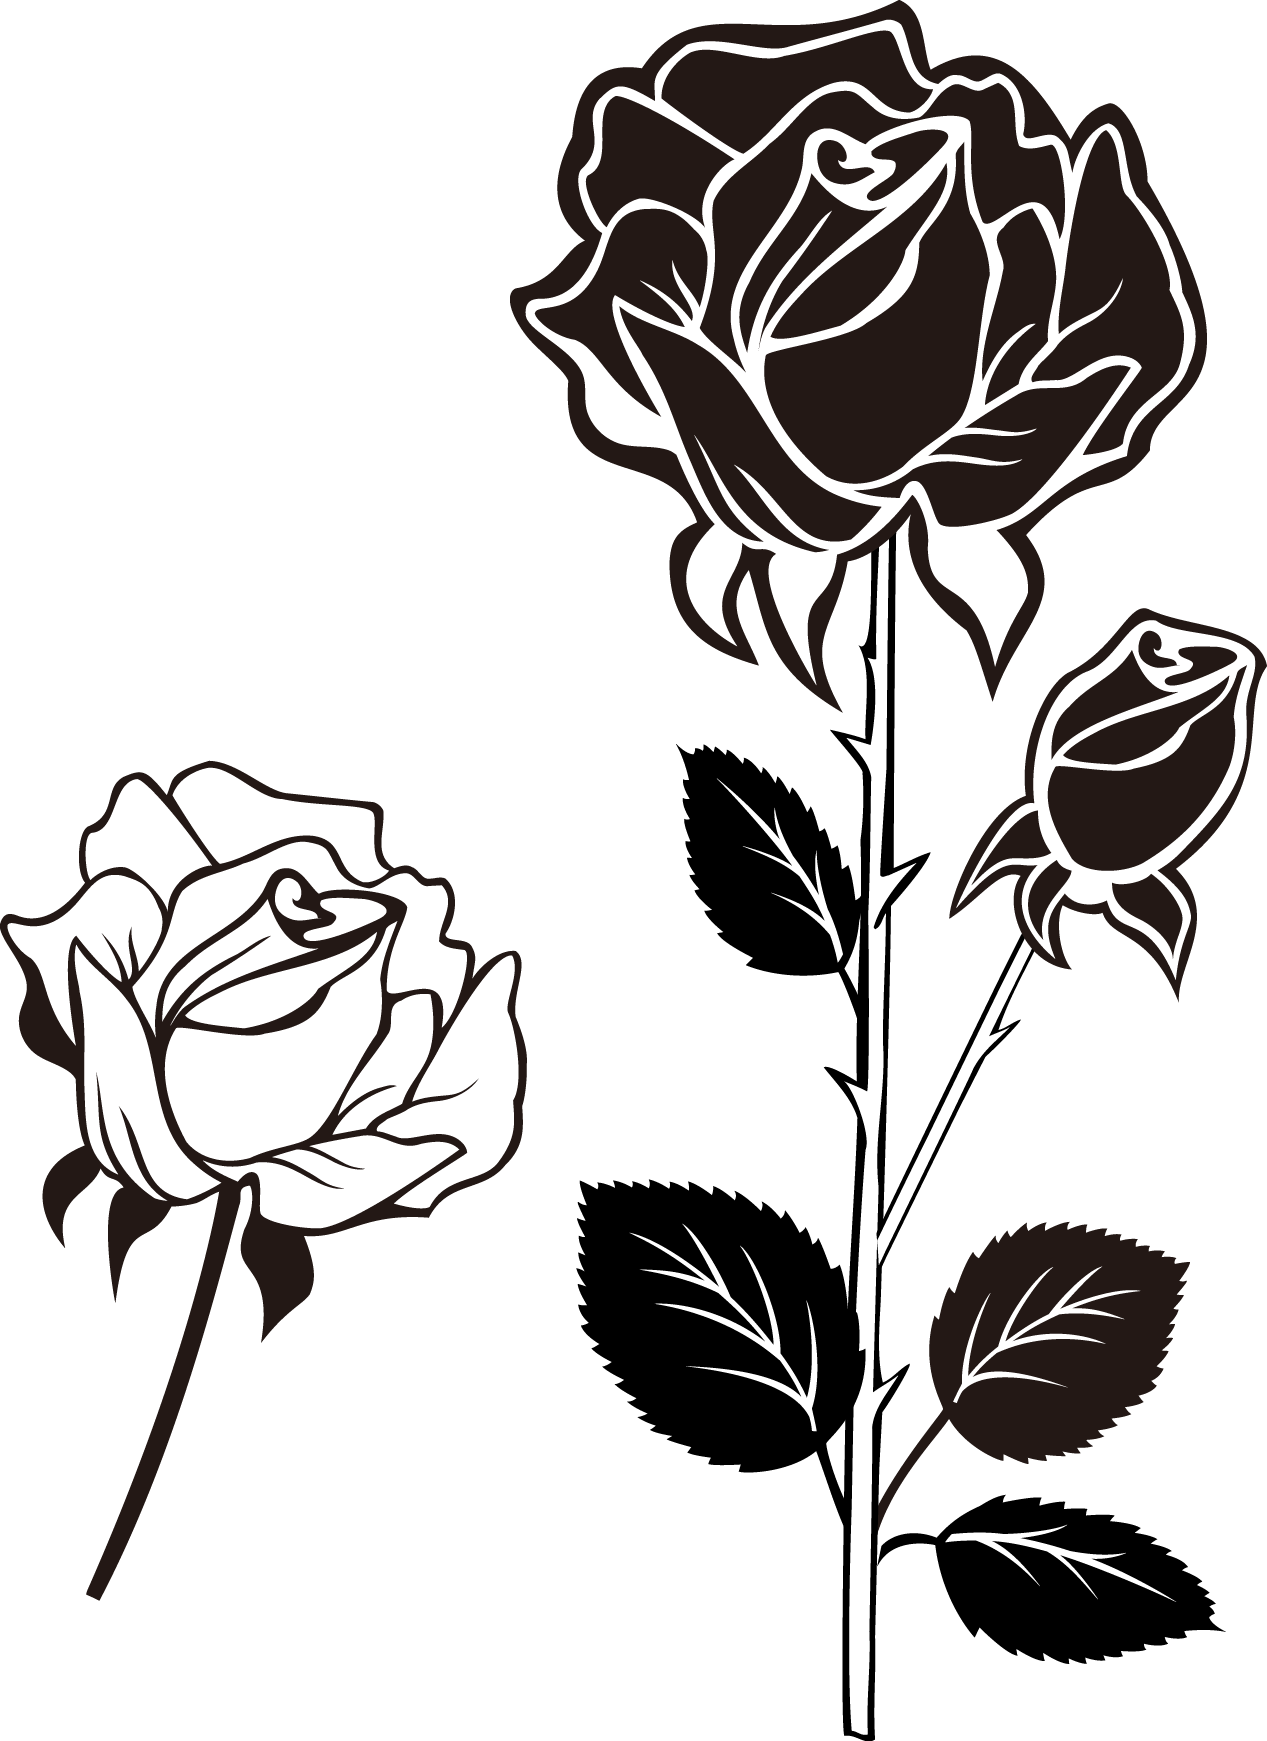 A Black And White Image Of Roses